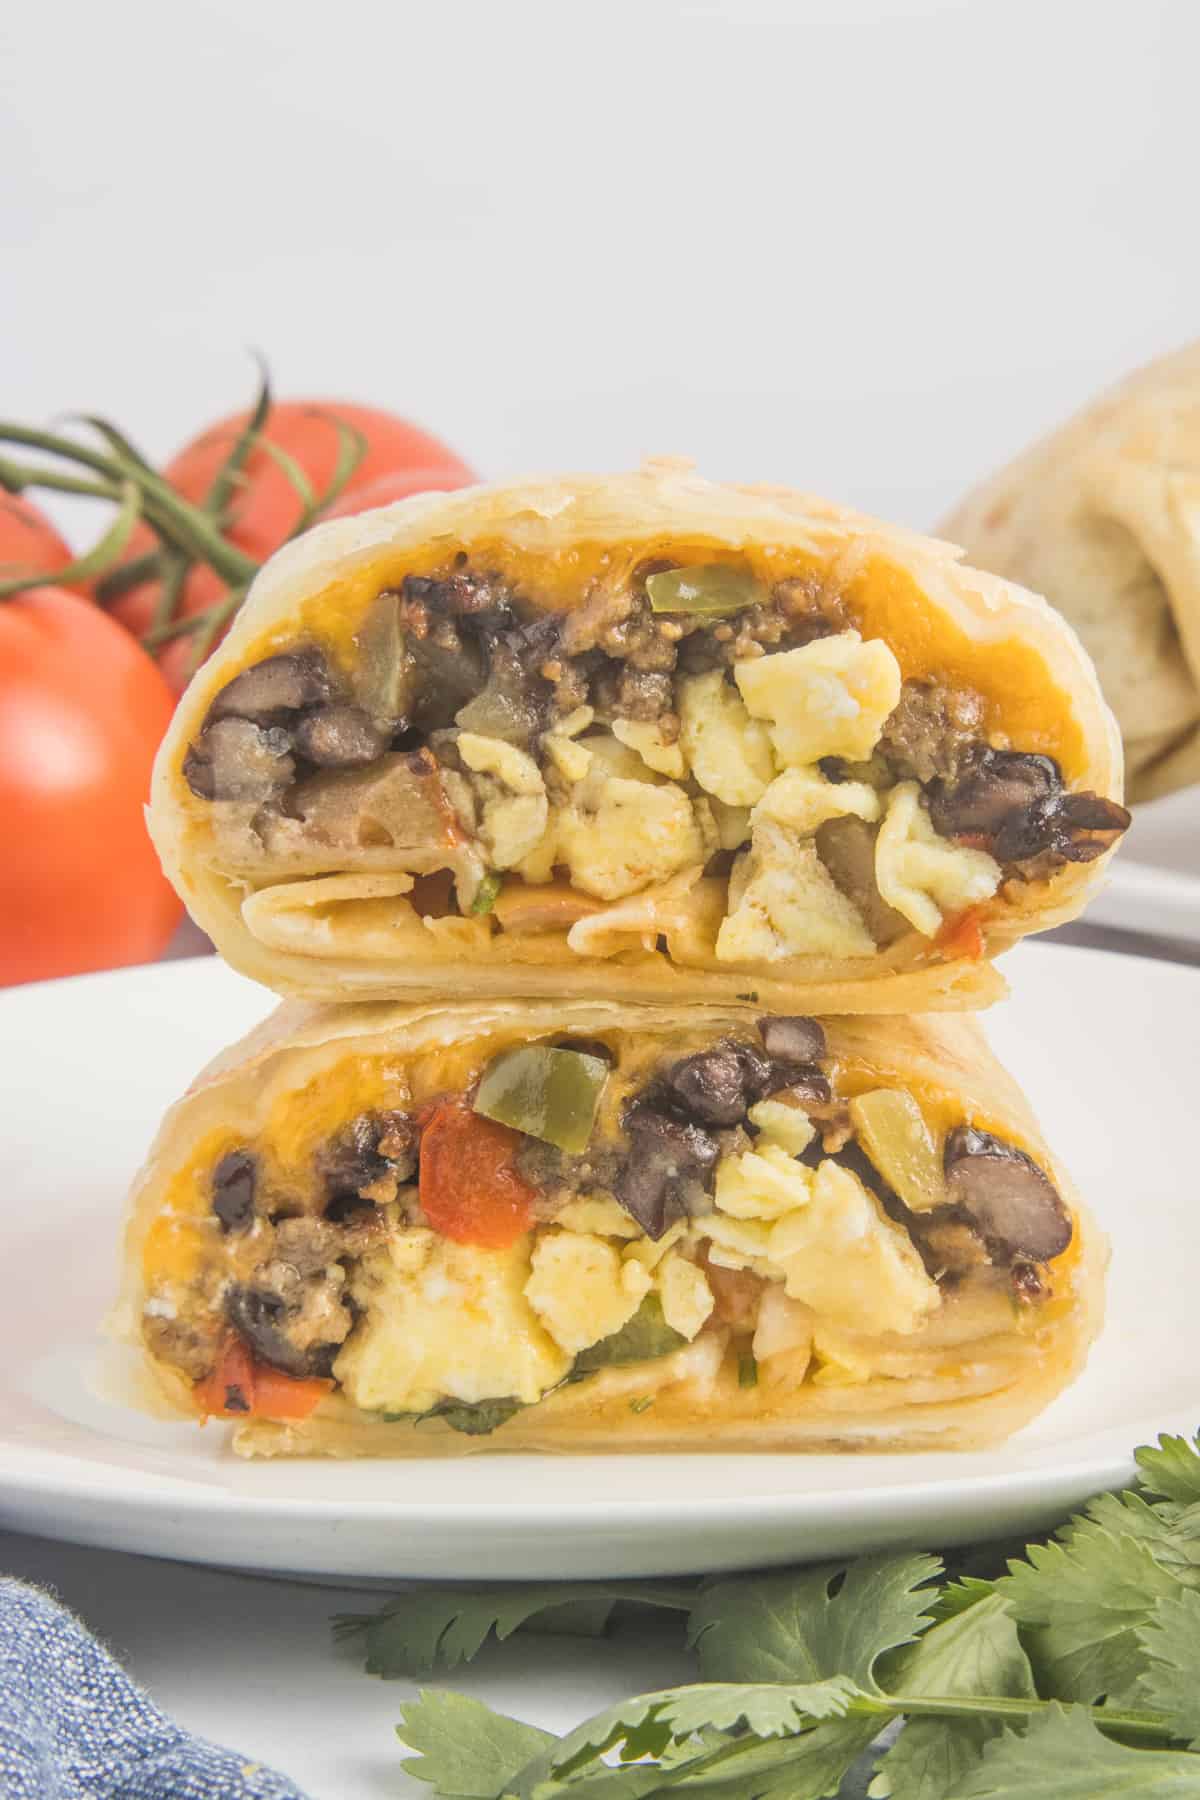 The image displays a stack of air-fried burritos. One of the burritos has been cut in half to reveal its contents.